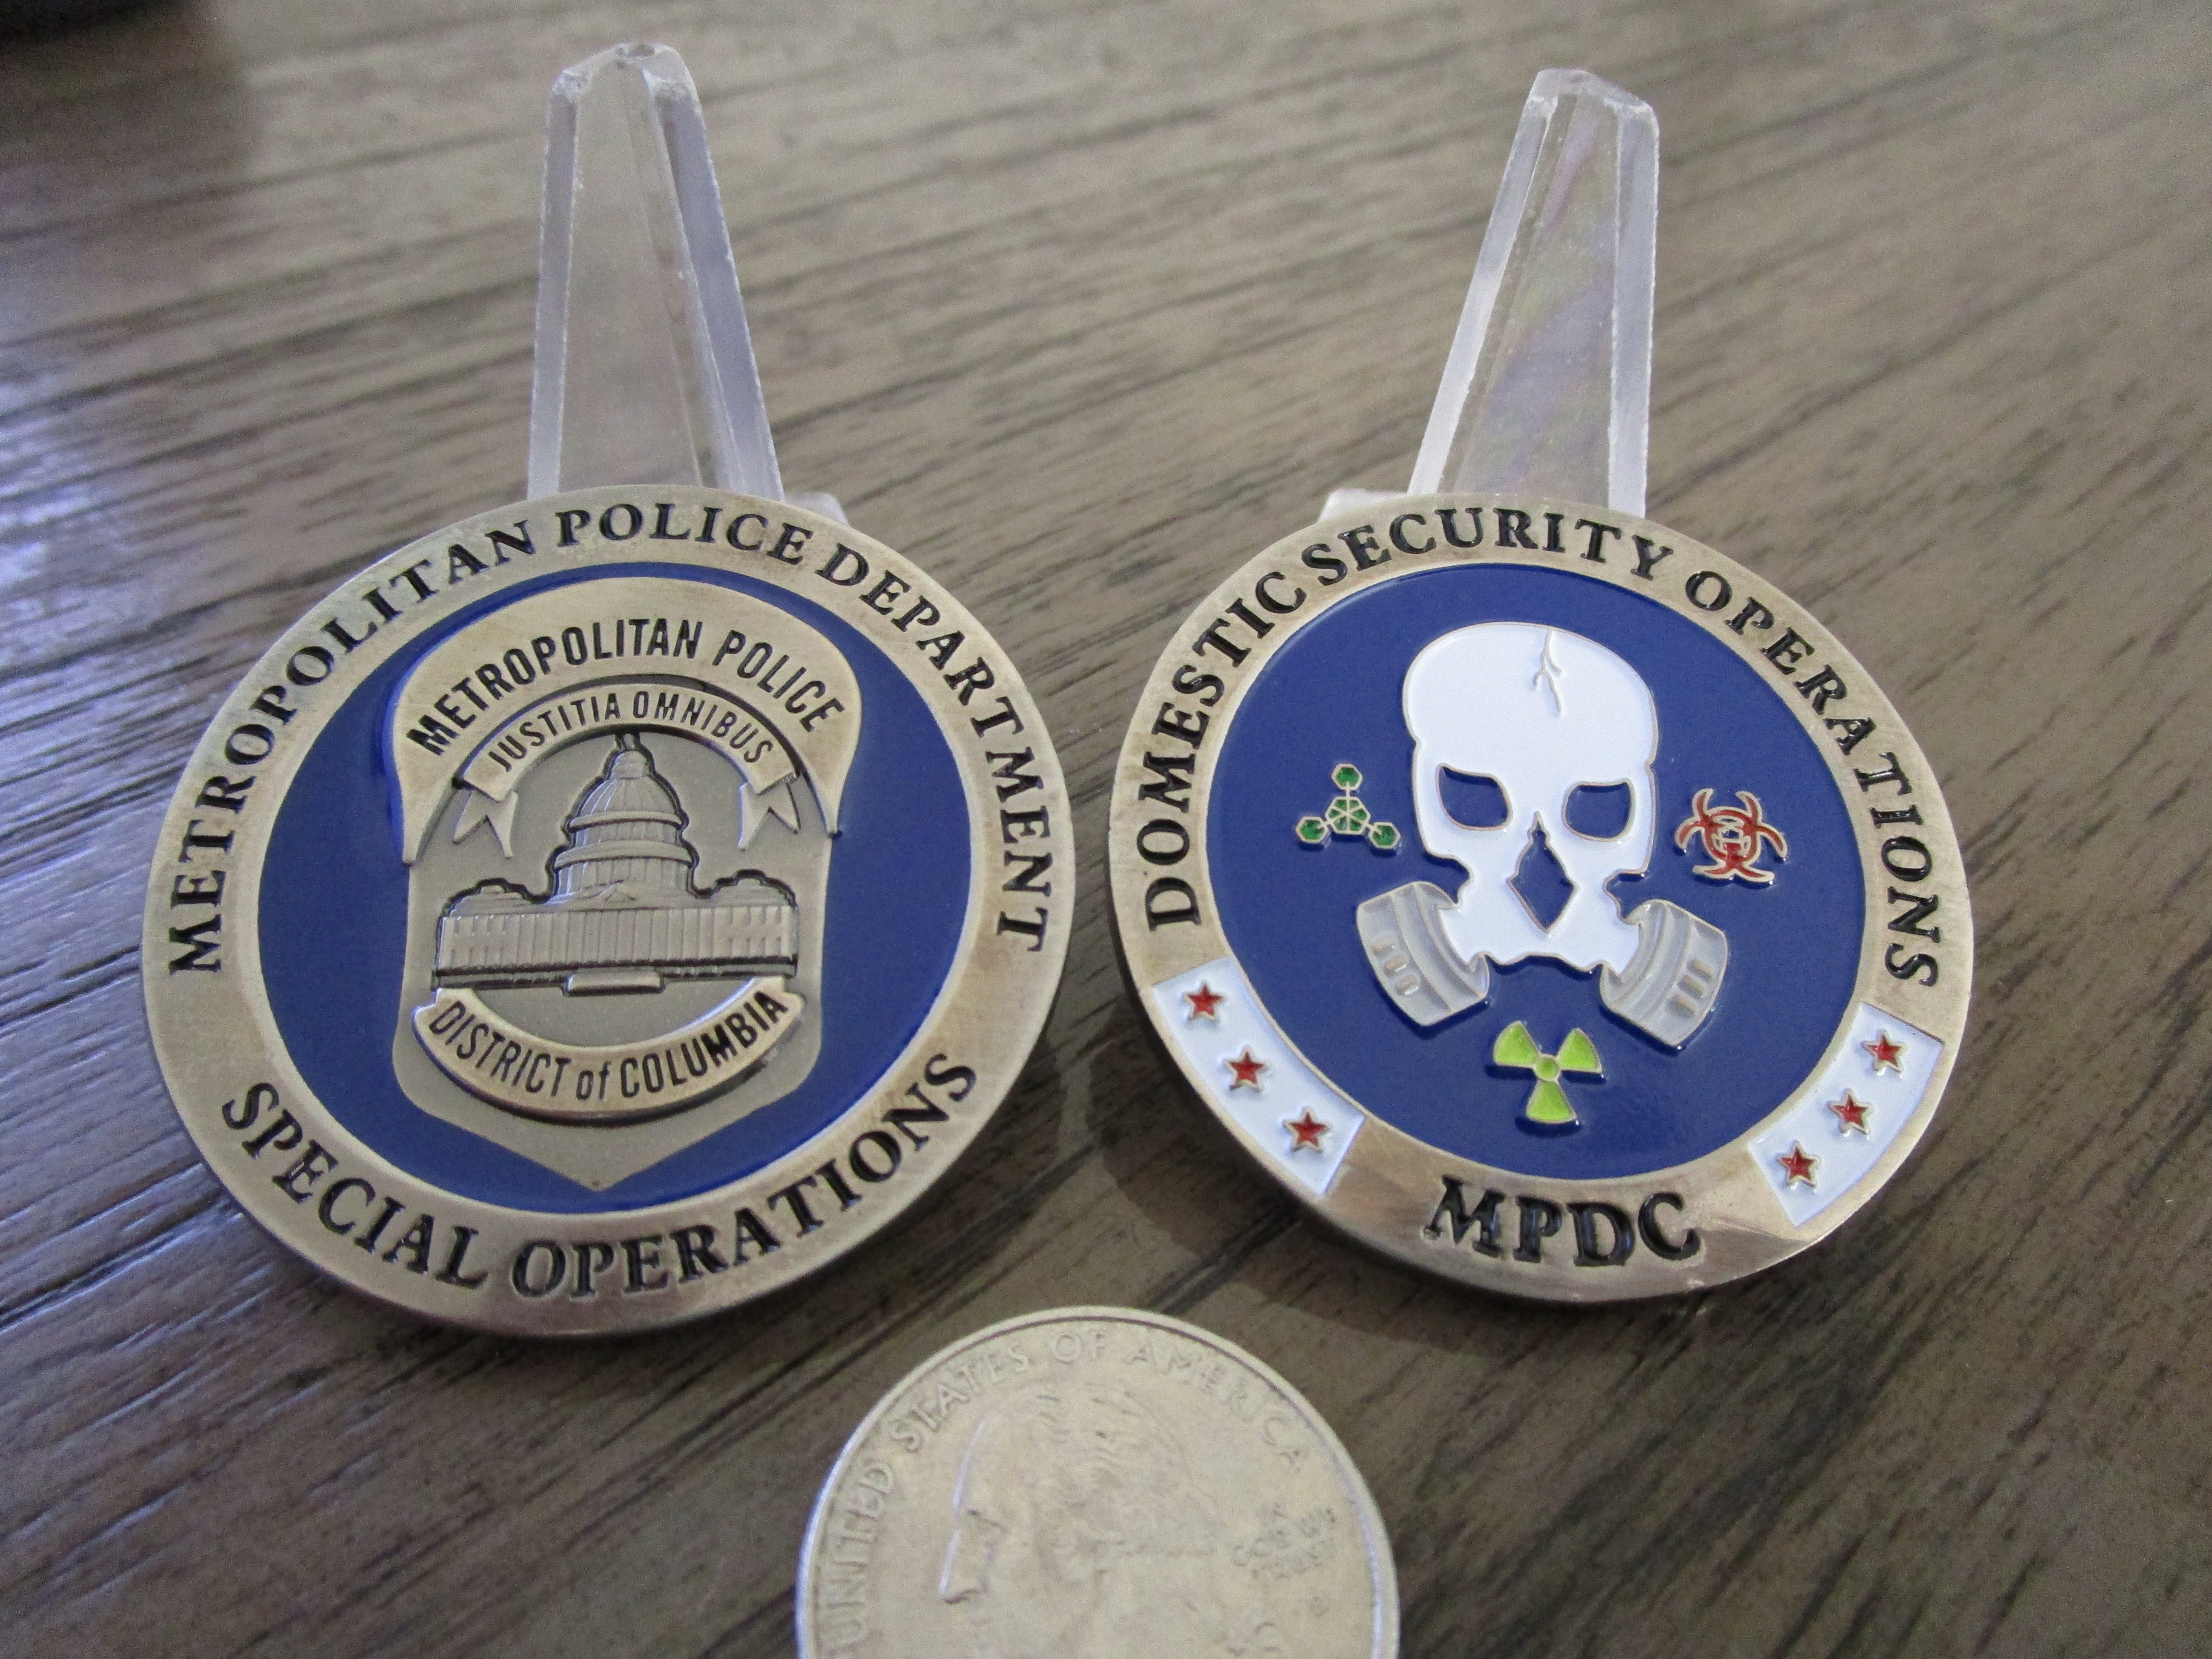 MPD MPDC Washington DC Metropolitan Police Special Operations Challenge Coin